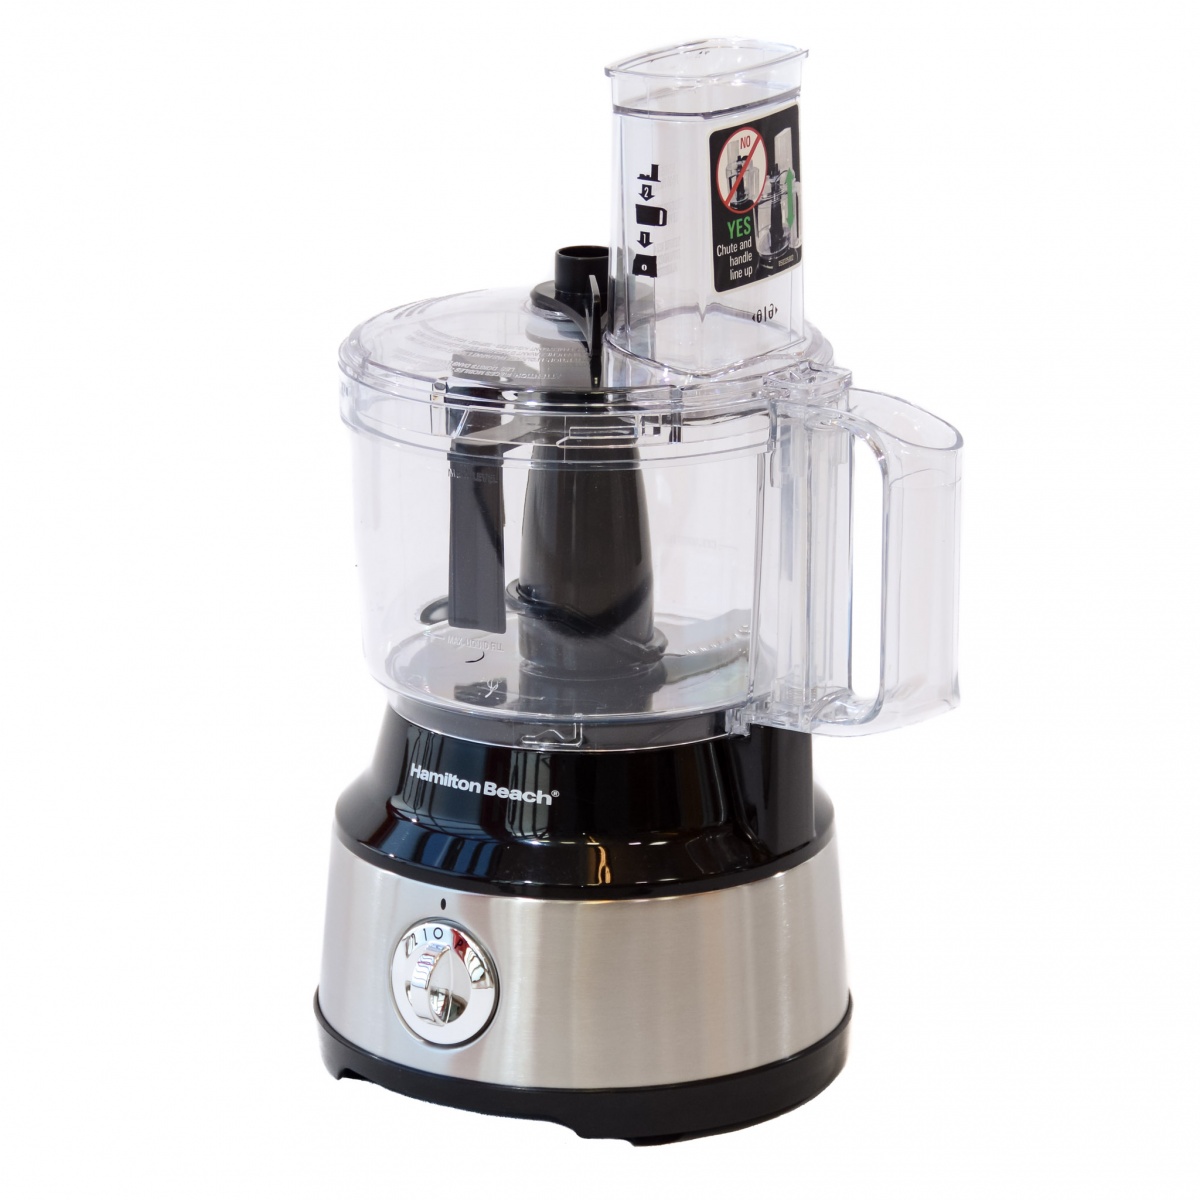 Hamilton Beach 10-Cup Food Processor with 6 Functions - Silver